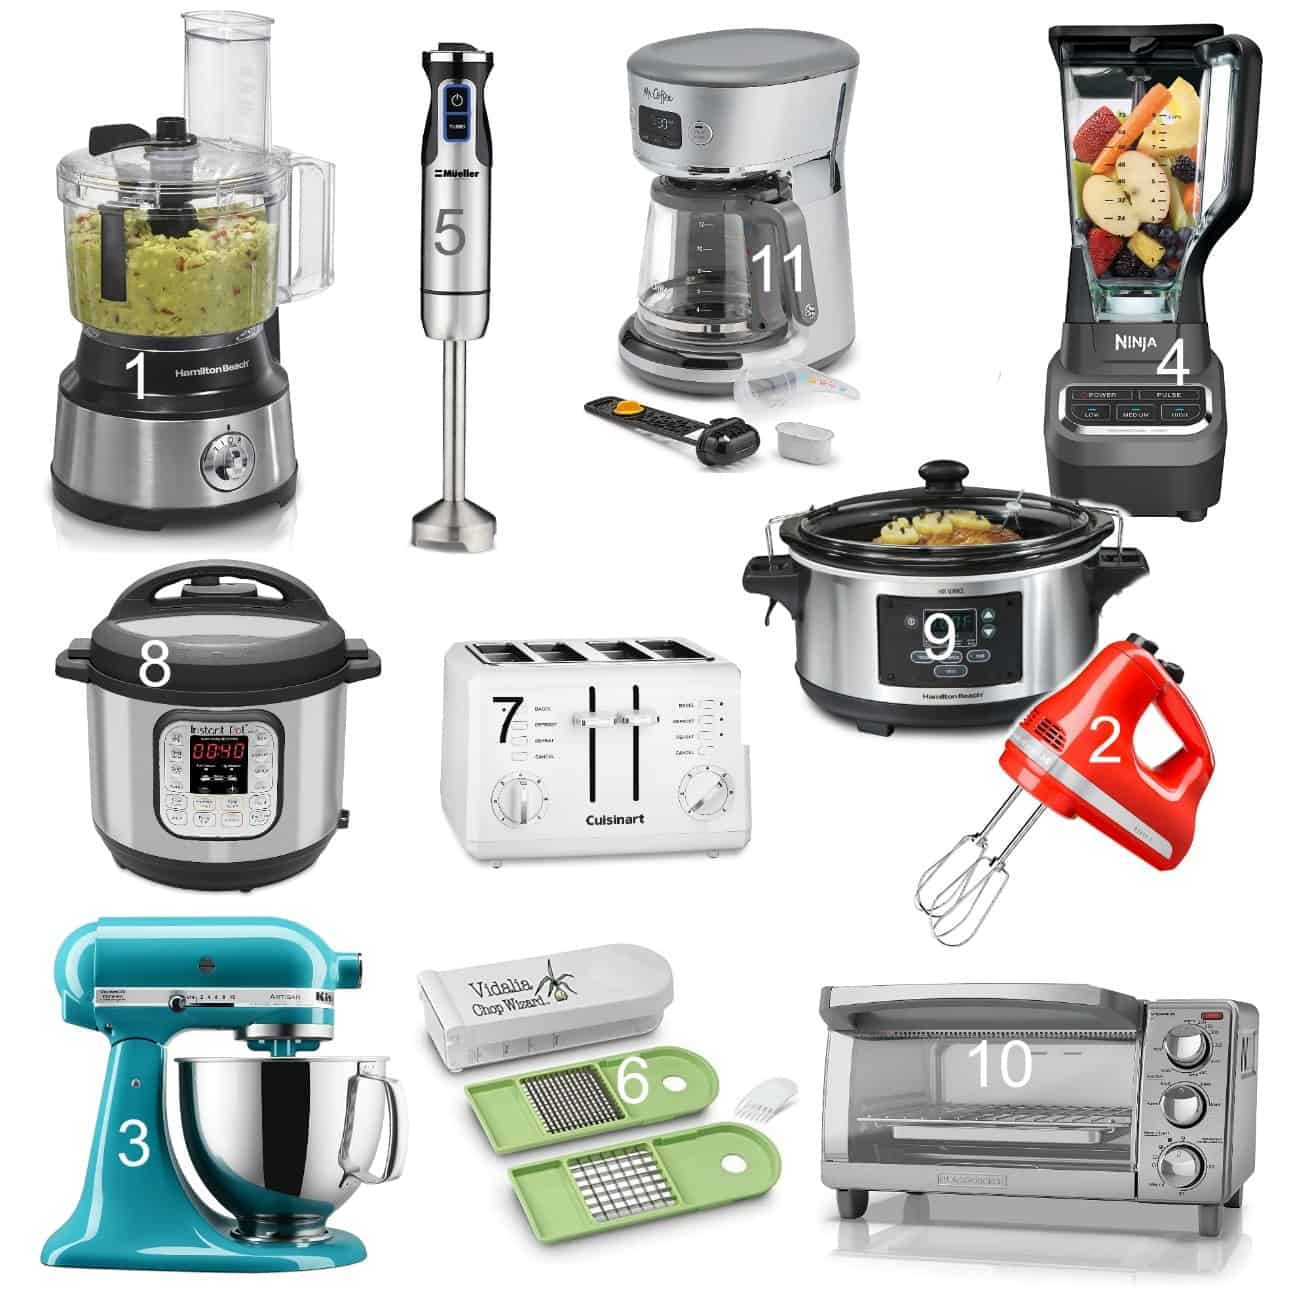 Cuisinart pots, pans, and small appliances img4